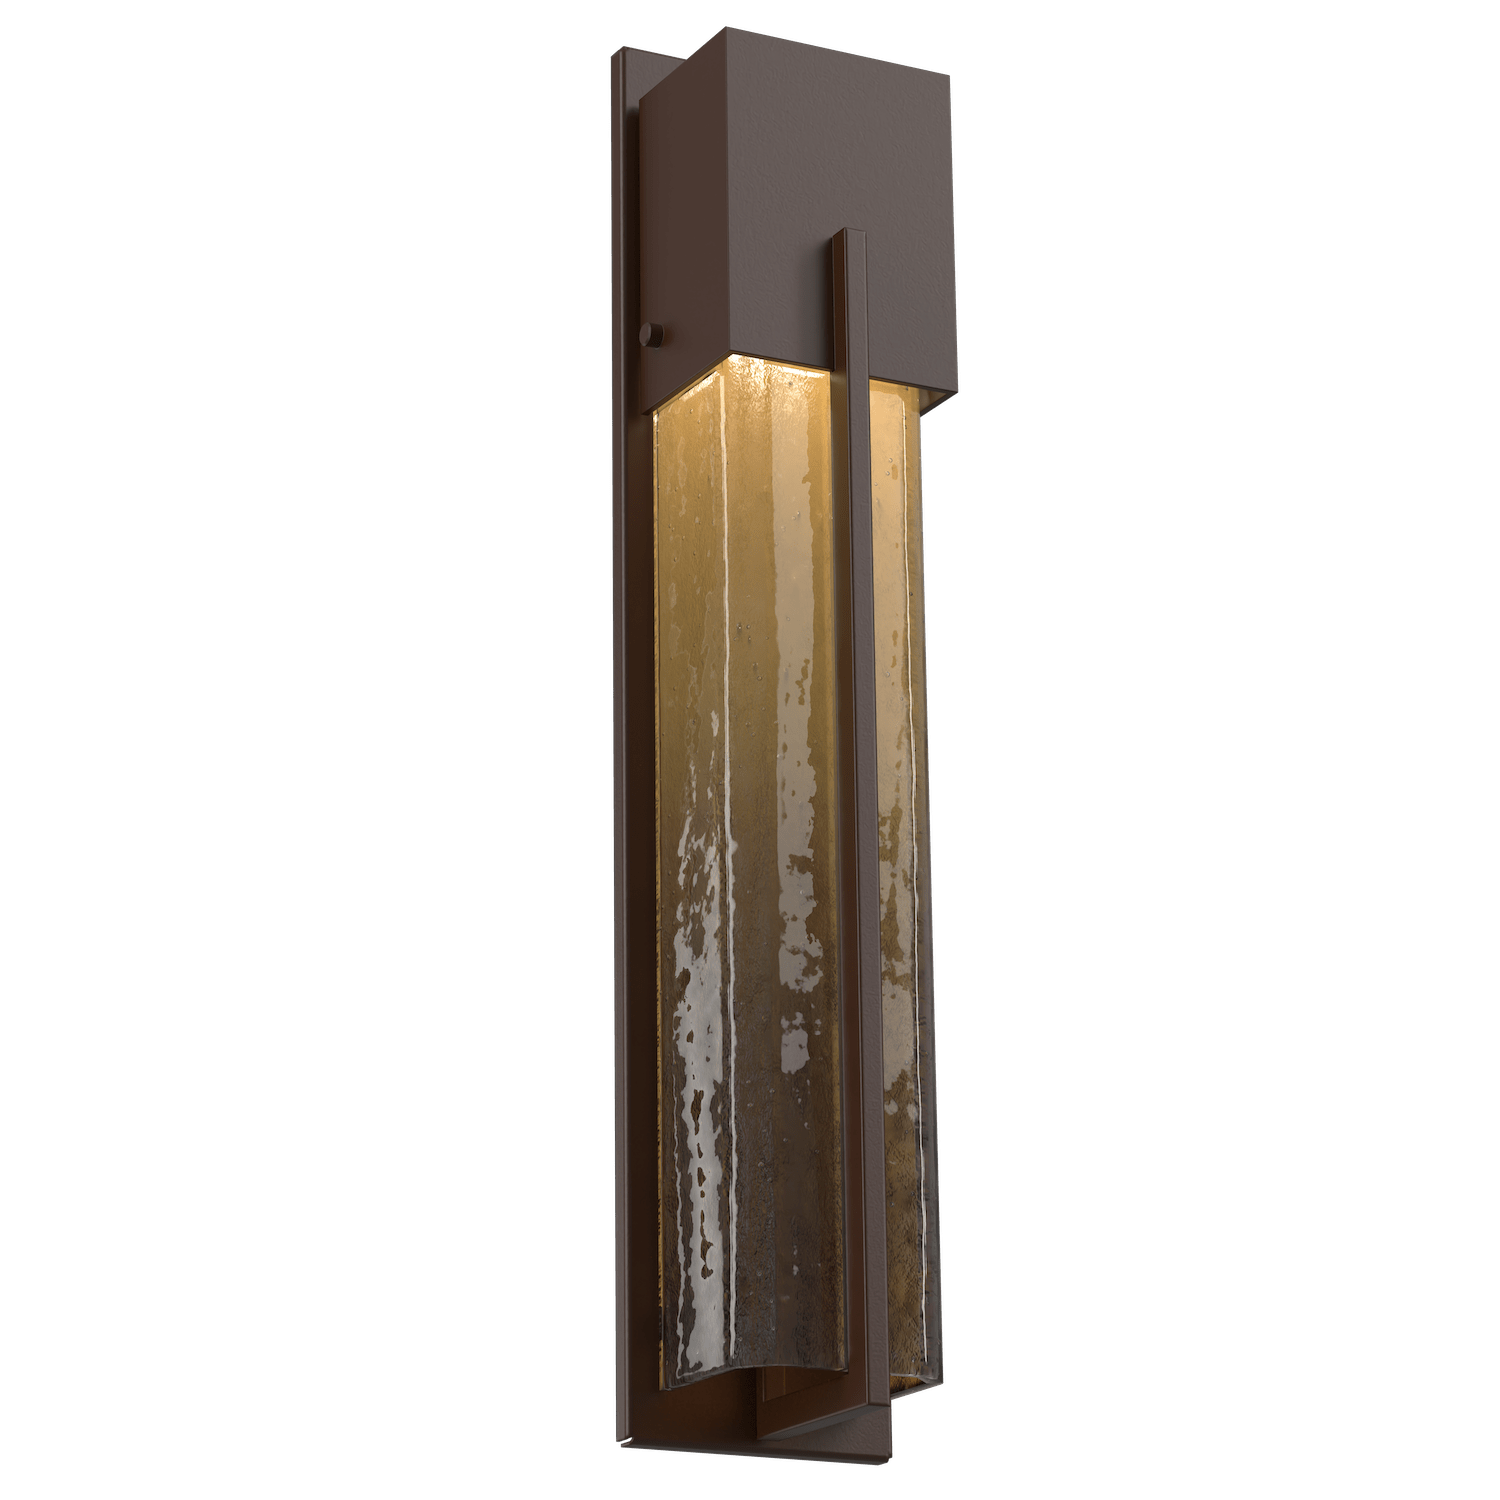 Hammerton Studio Square Outdoor Cover LED Sconce